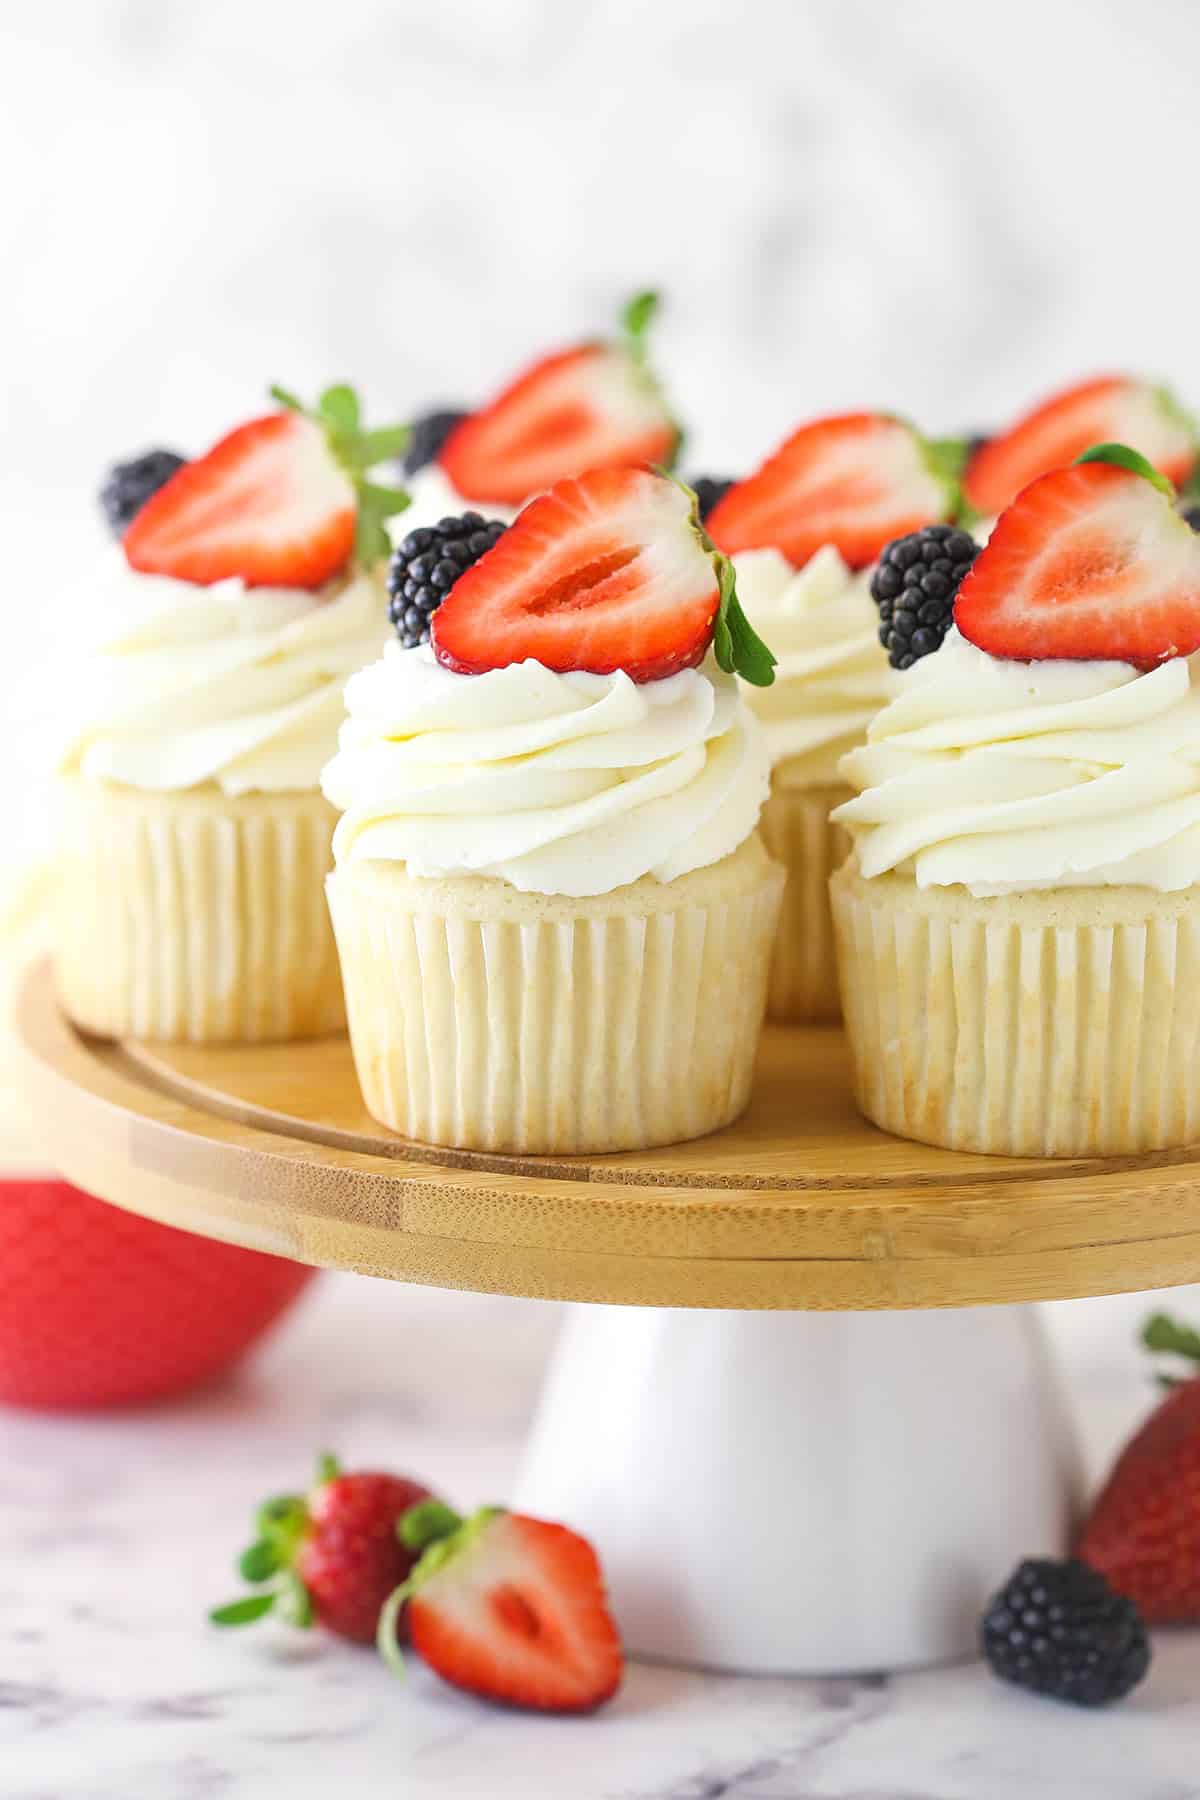 Cupcakes topped with whipped cream frosting and fresh berries on a cake stand surrounded by fresh berries